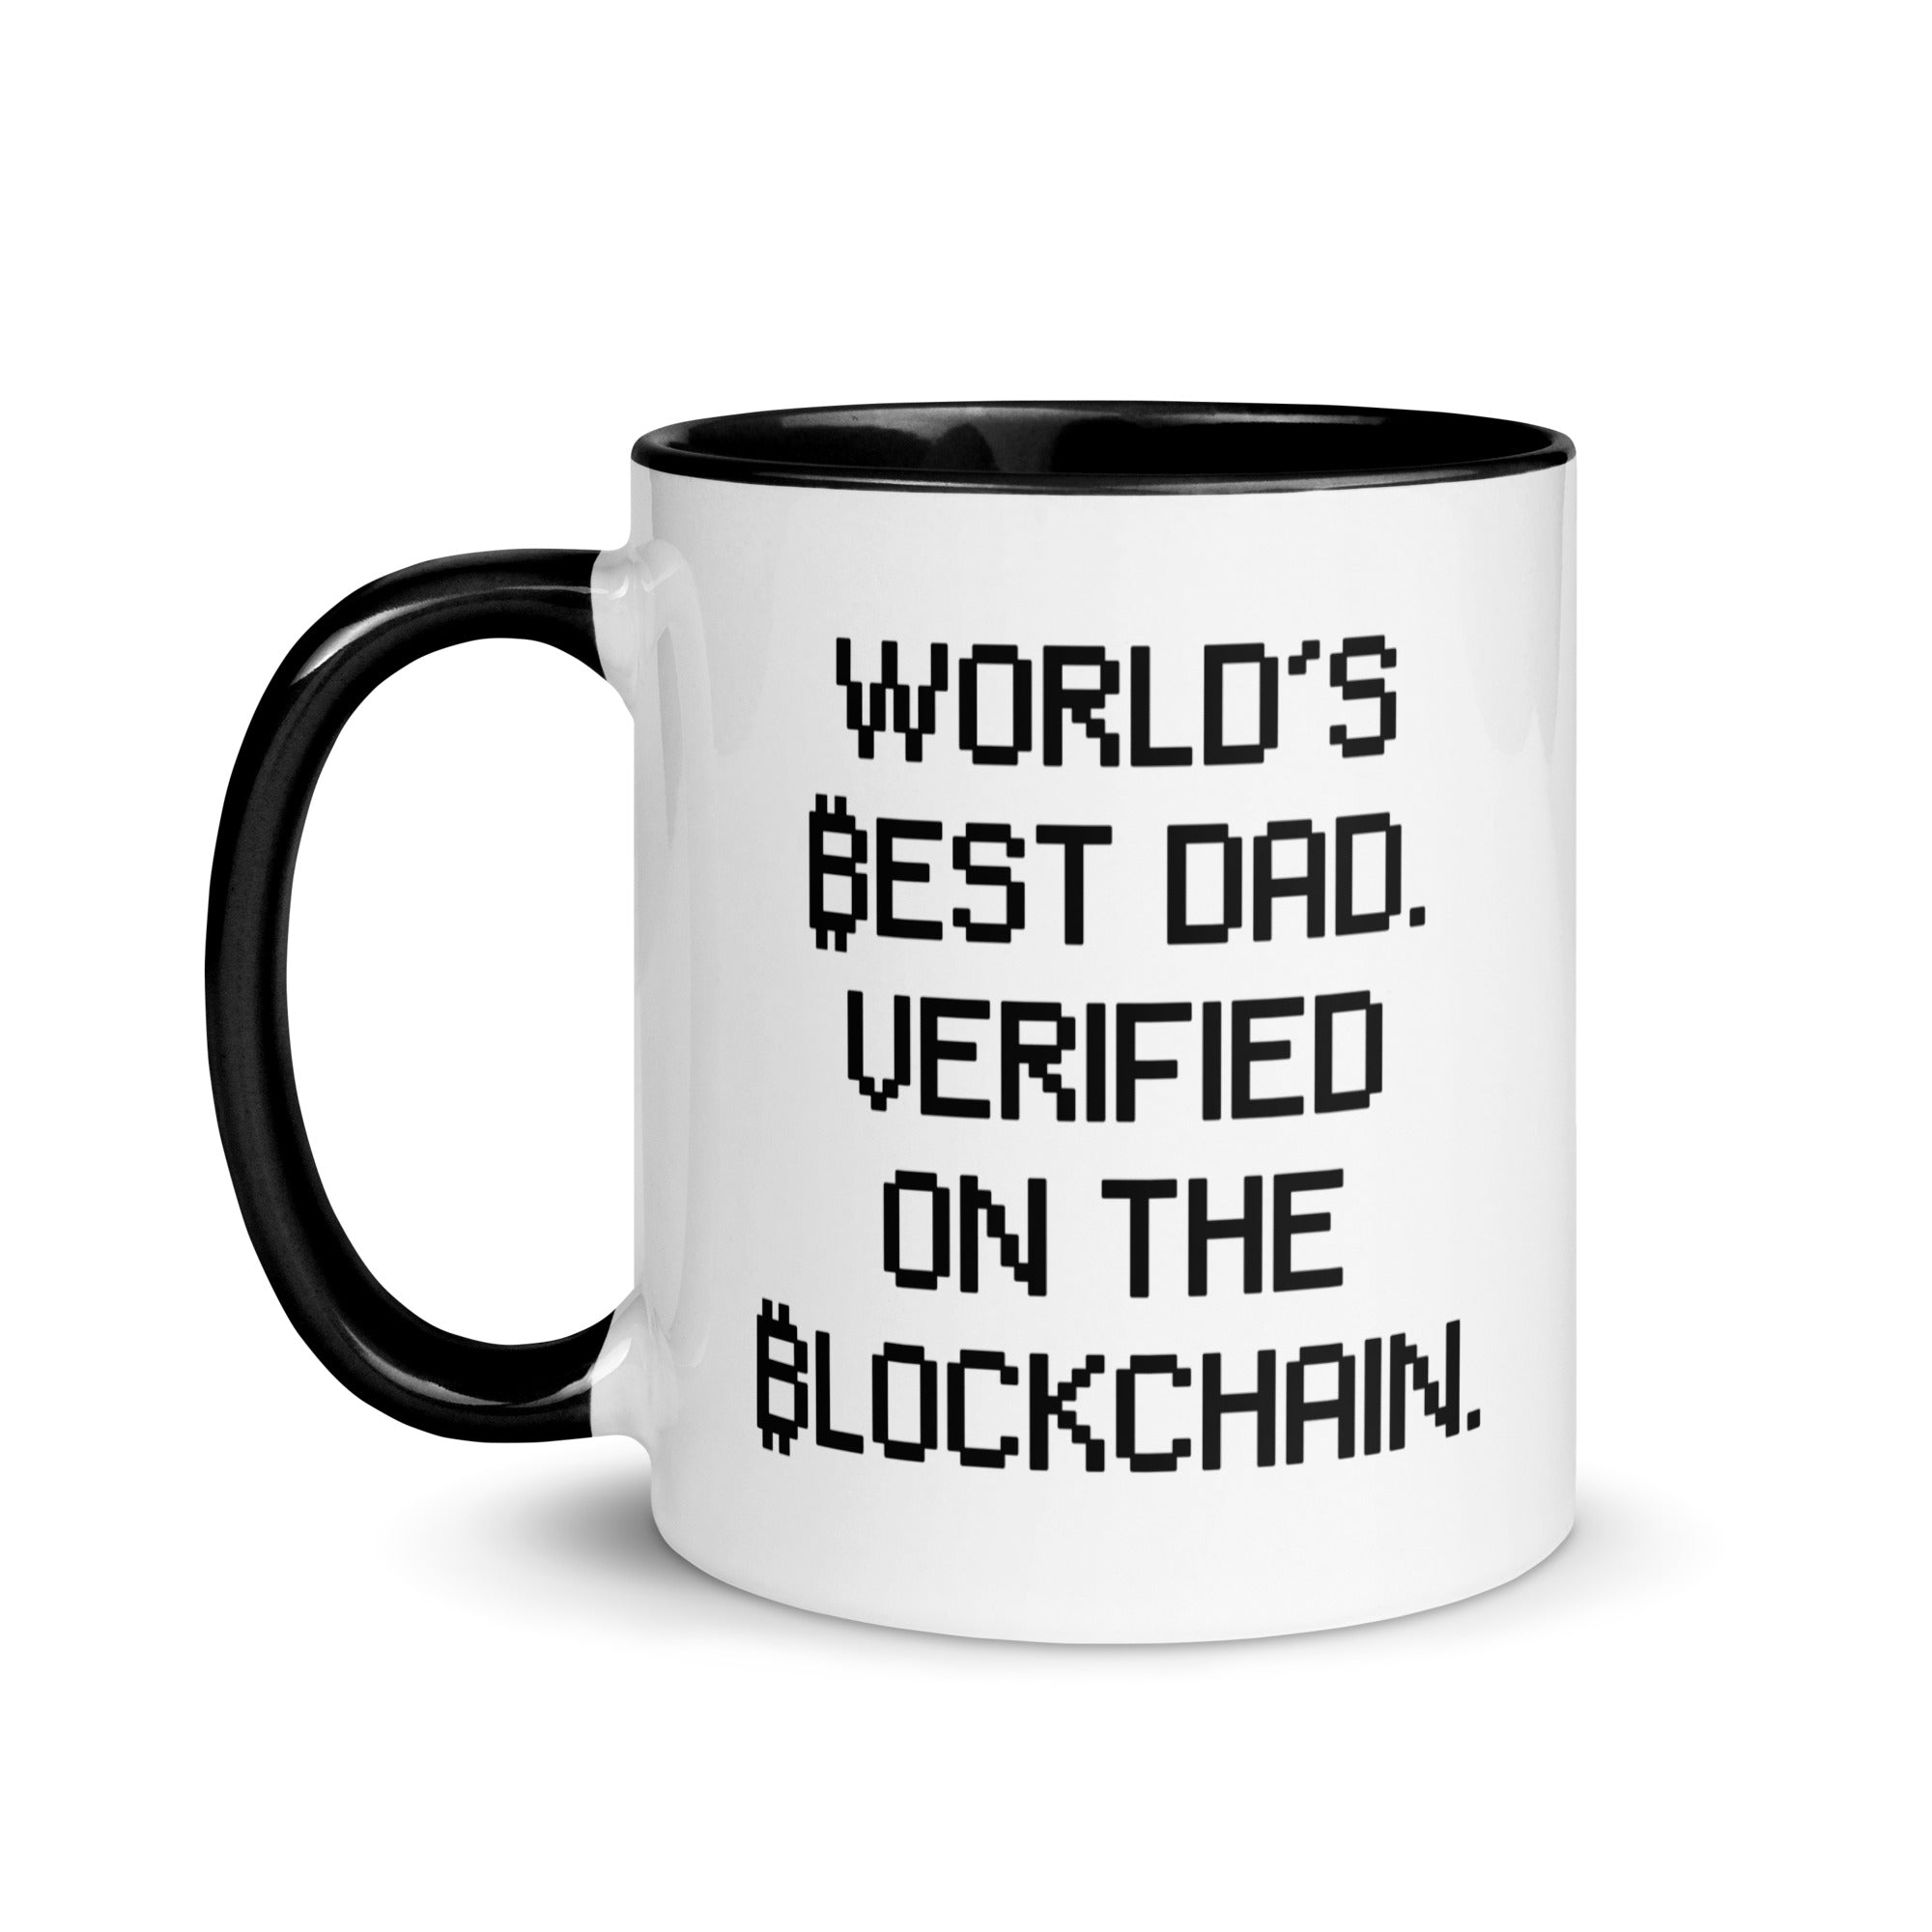 Bitcoin Drinkware - World's Best Dad - Verified on the Blockchain. Left handle view. Available from NEONCRYPTO STORE.